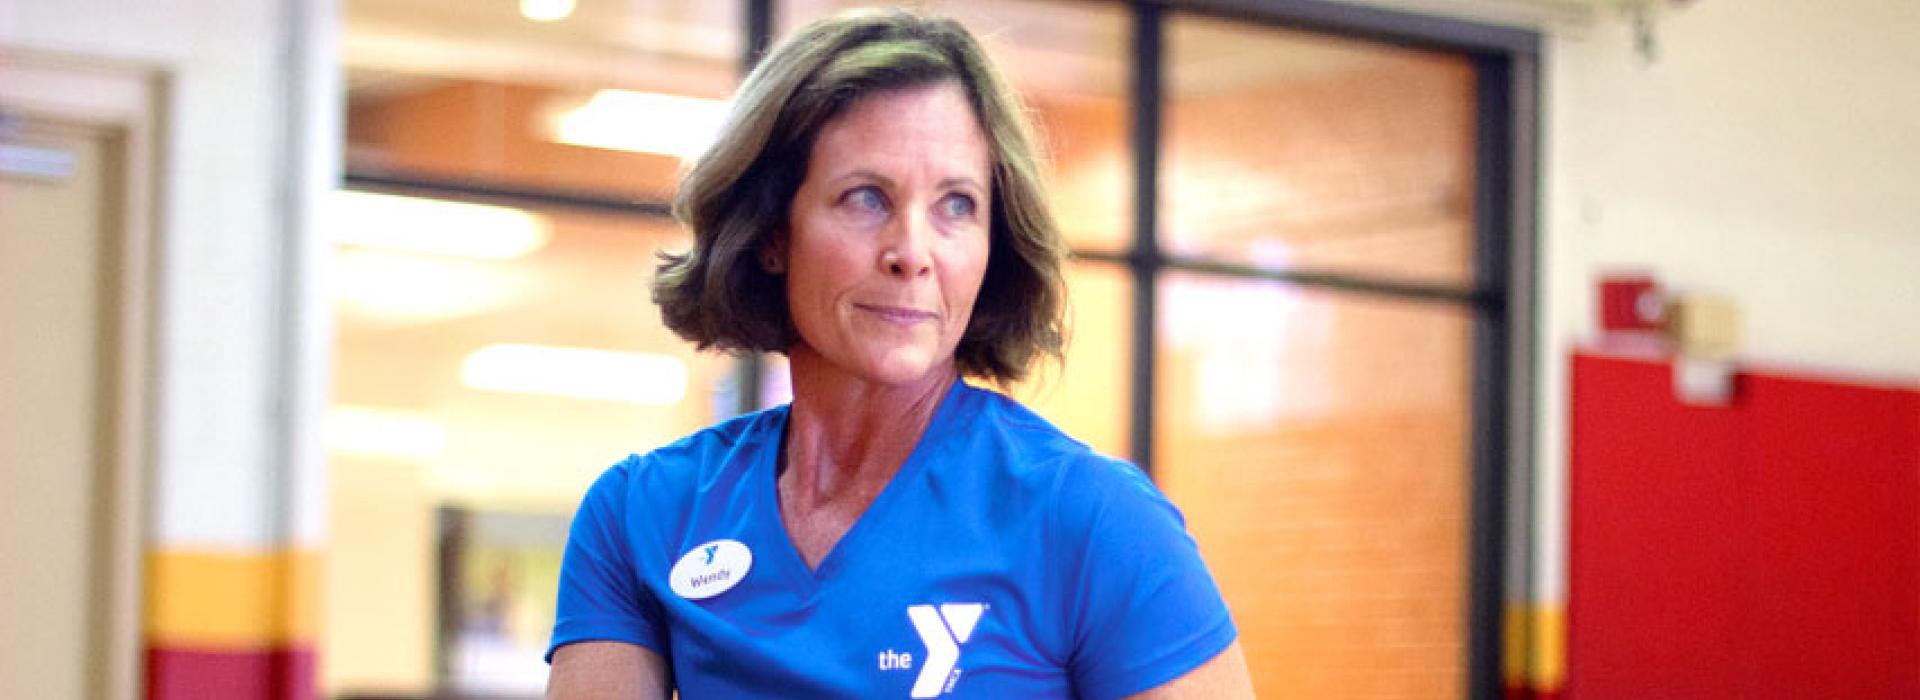 Oscar Lasko YMCA personal trainer Wendy Young demonstrates a workout with a weighted ball in the gym at the Oscar Lasko YMCA in West Chester PA